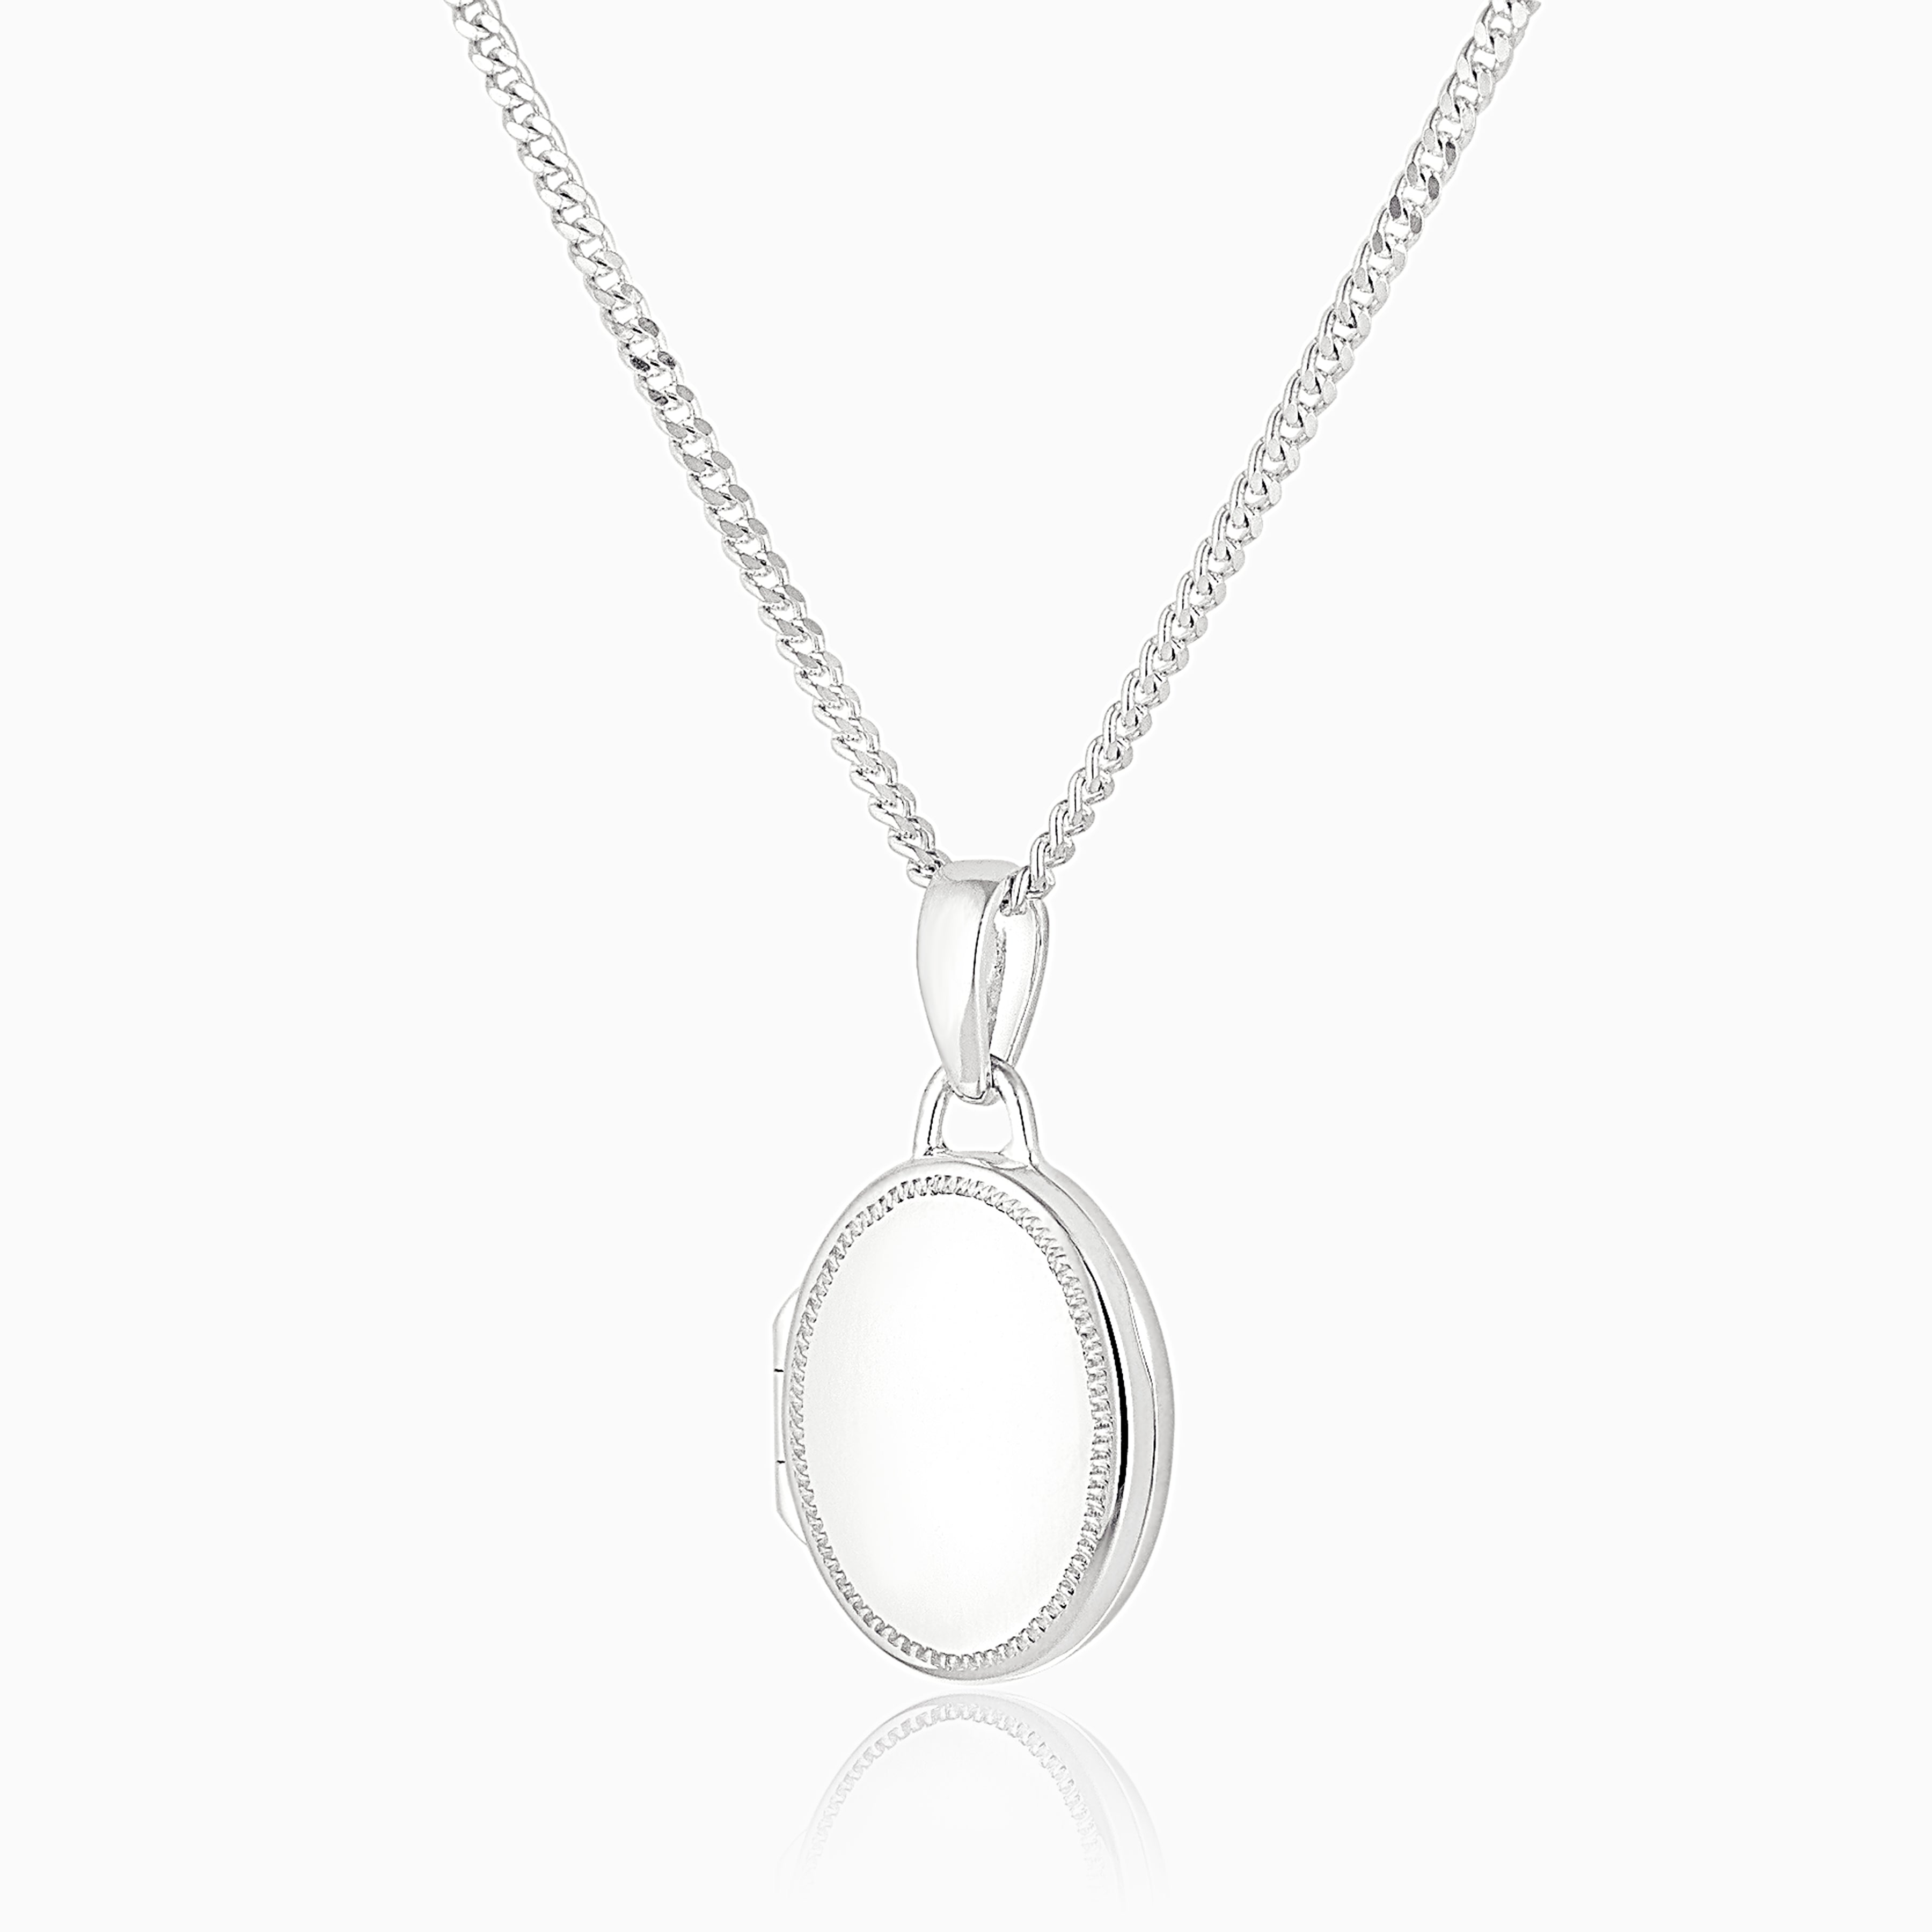 sterling silver oval locket with a riddle-edged engraved border, on sterling silver rope chain